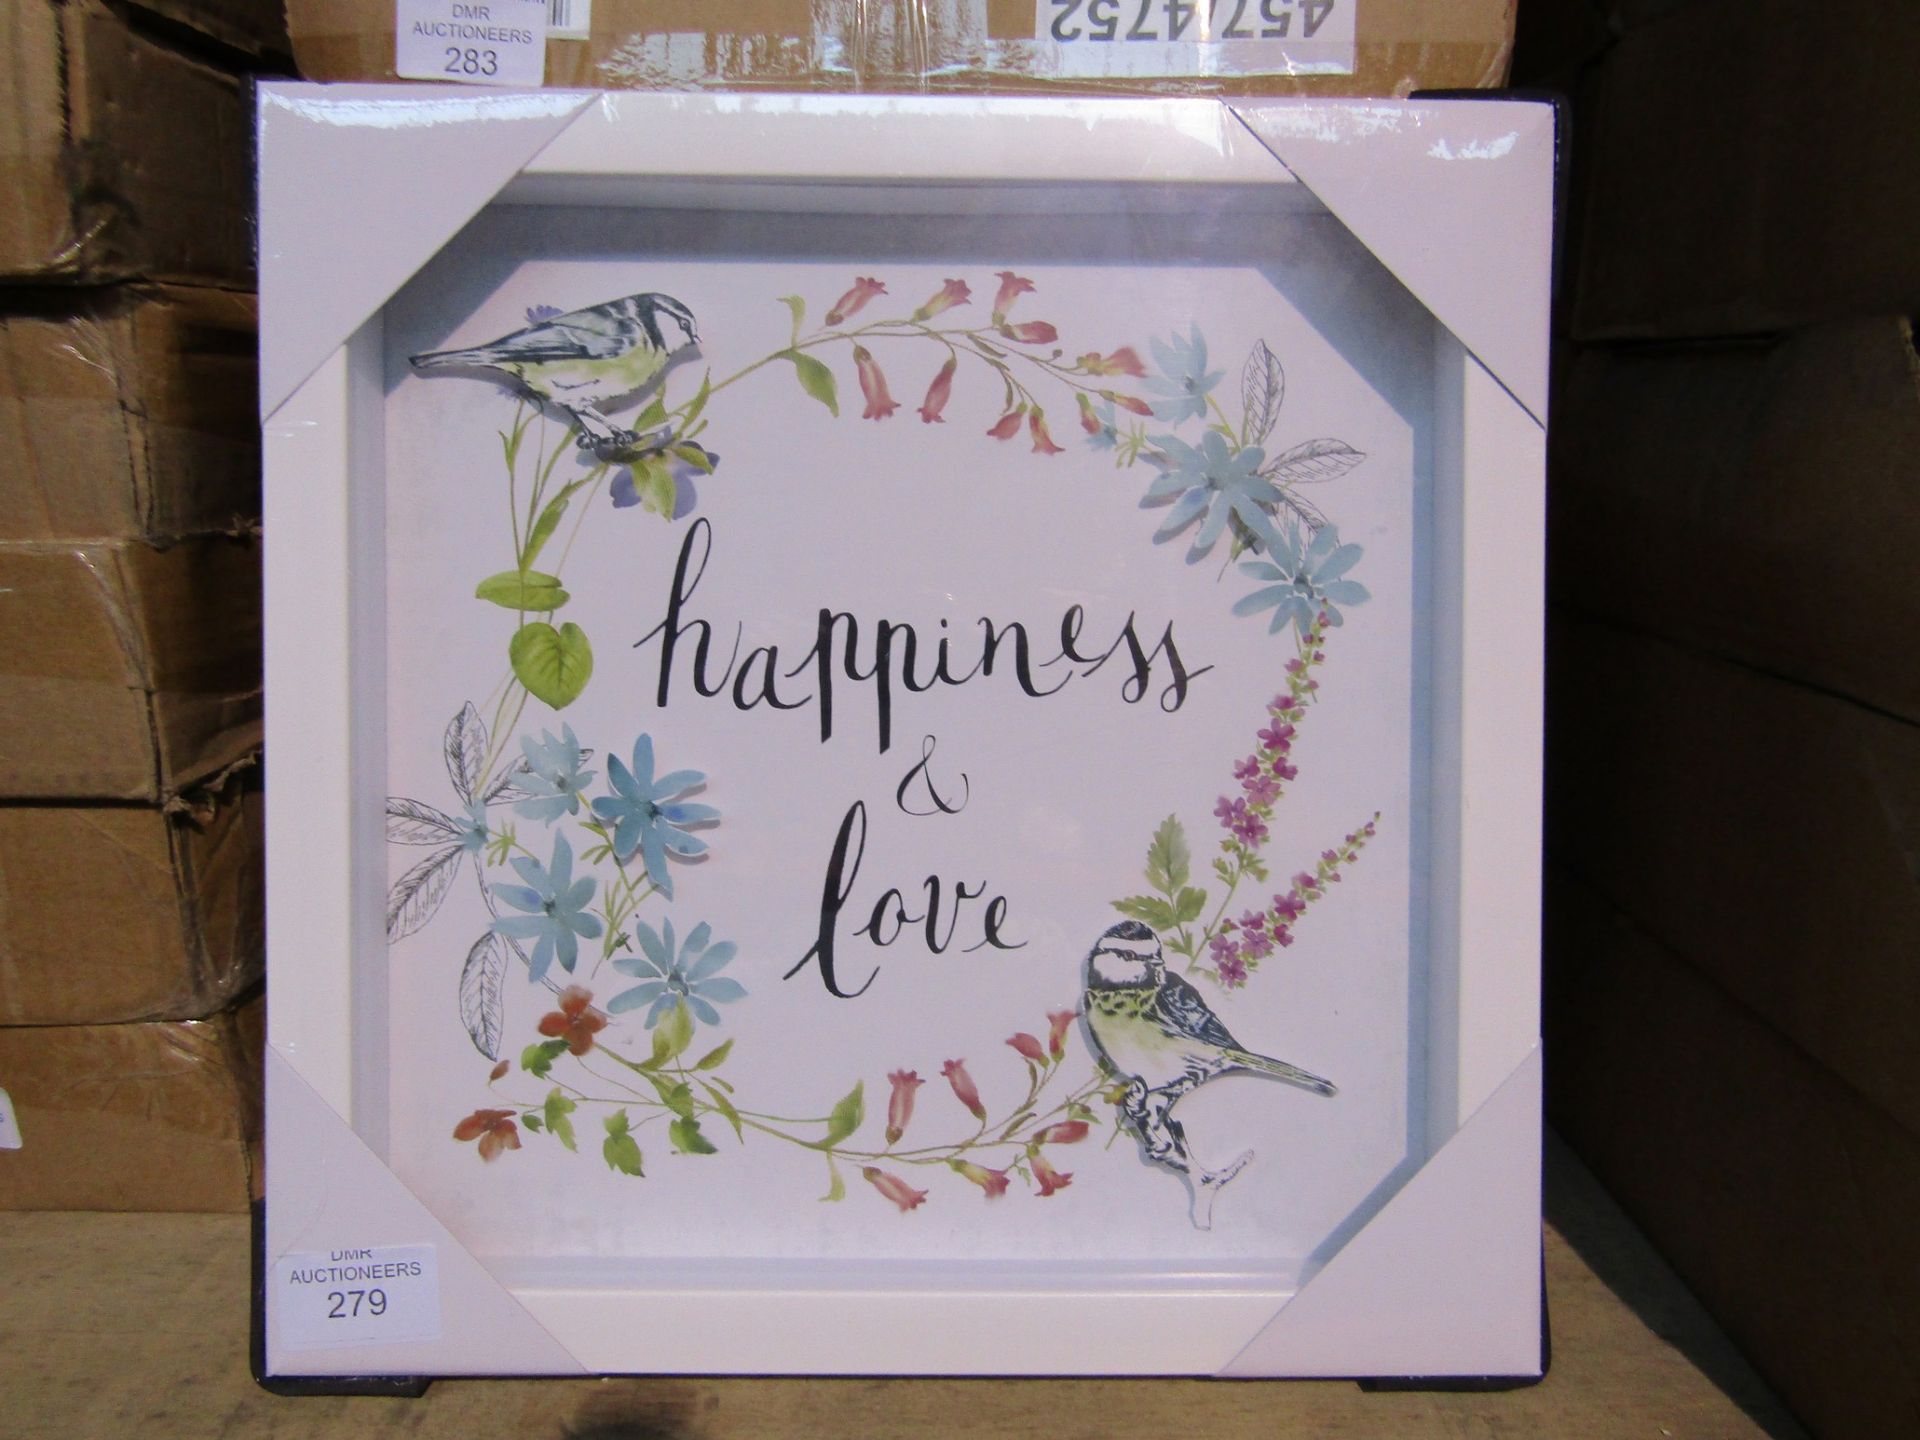 1 BRAND NEW BOXED ARTHOUSE HAPPINESS AND LOVE 30CM X 30CM FRAMED PRINT